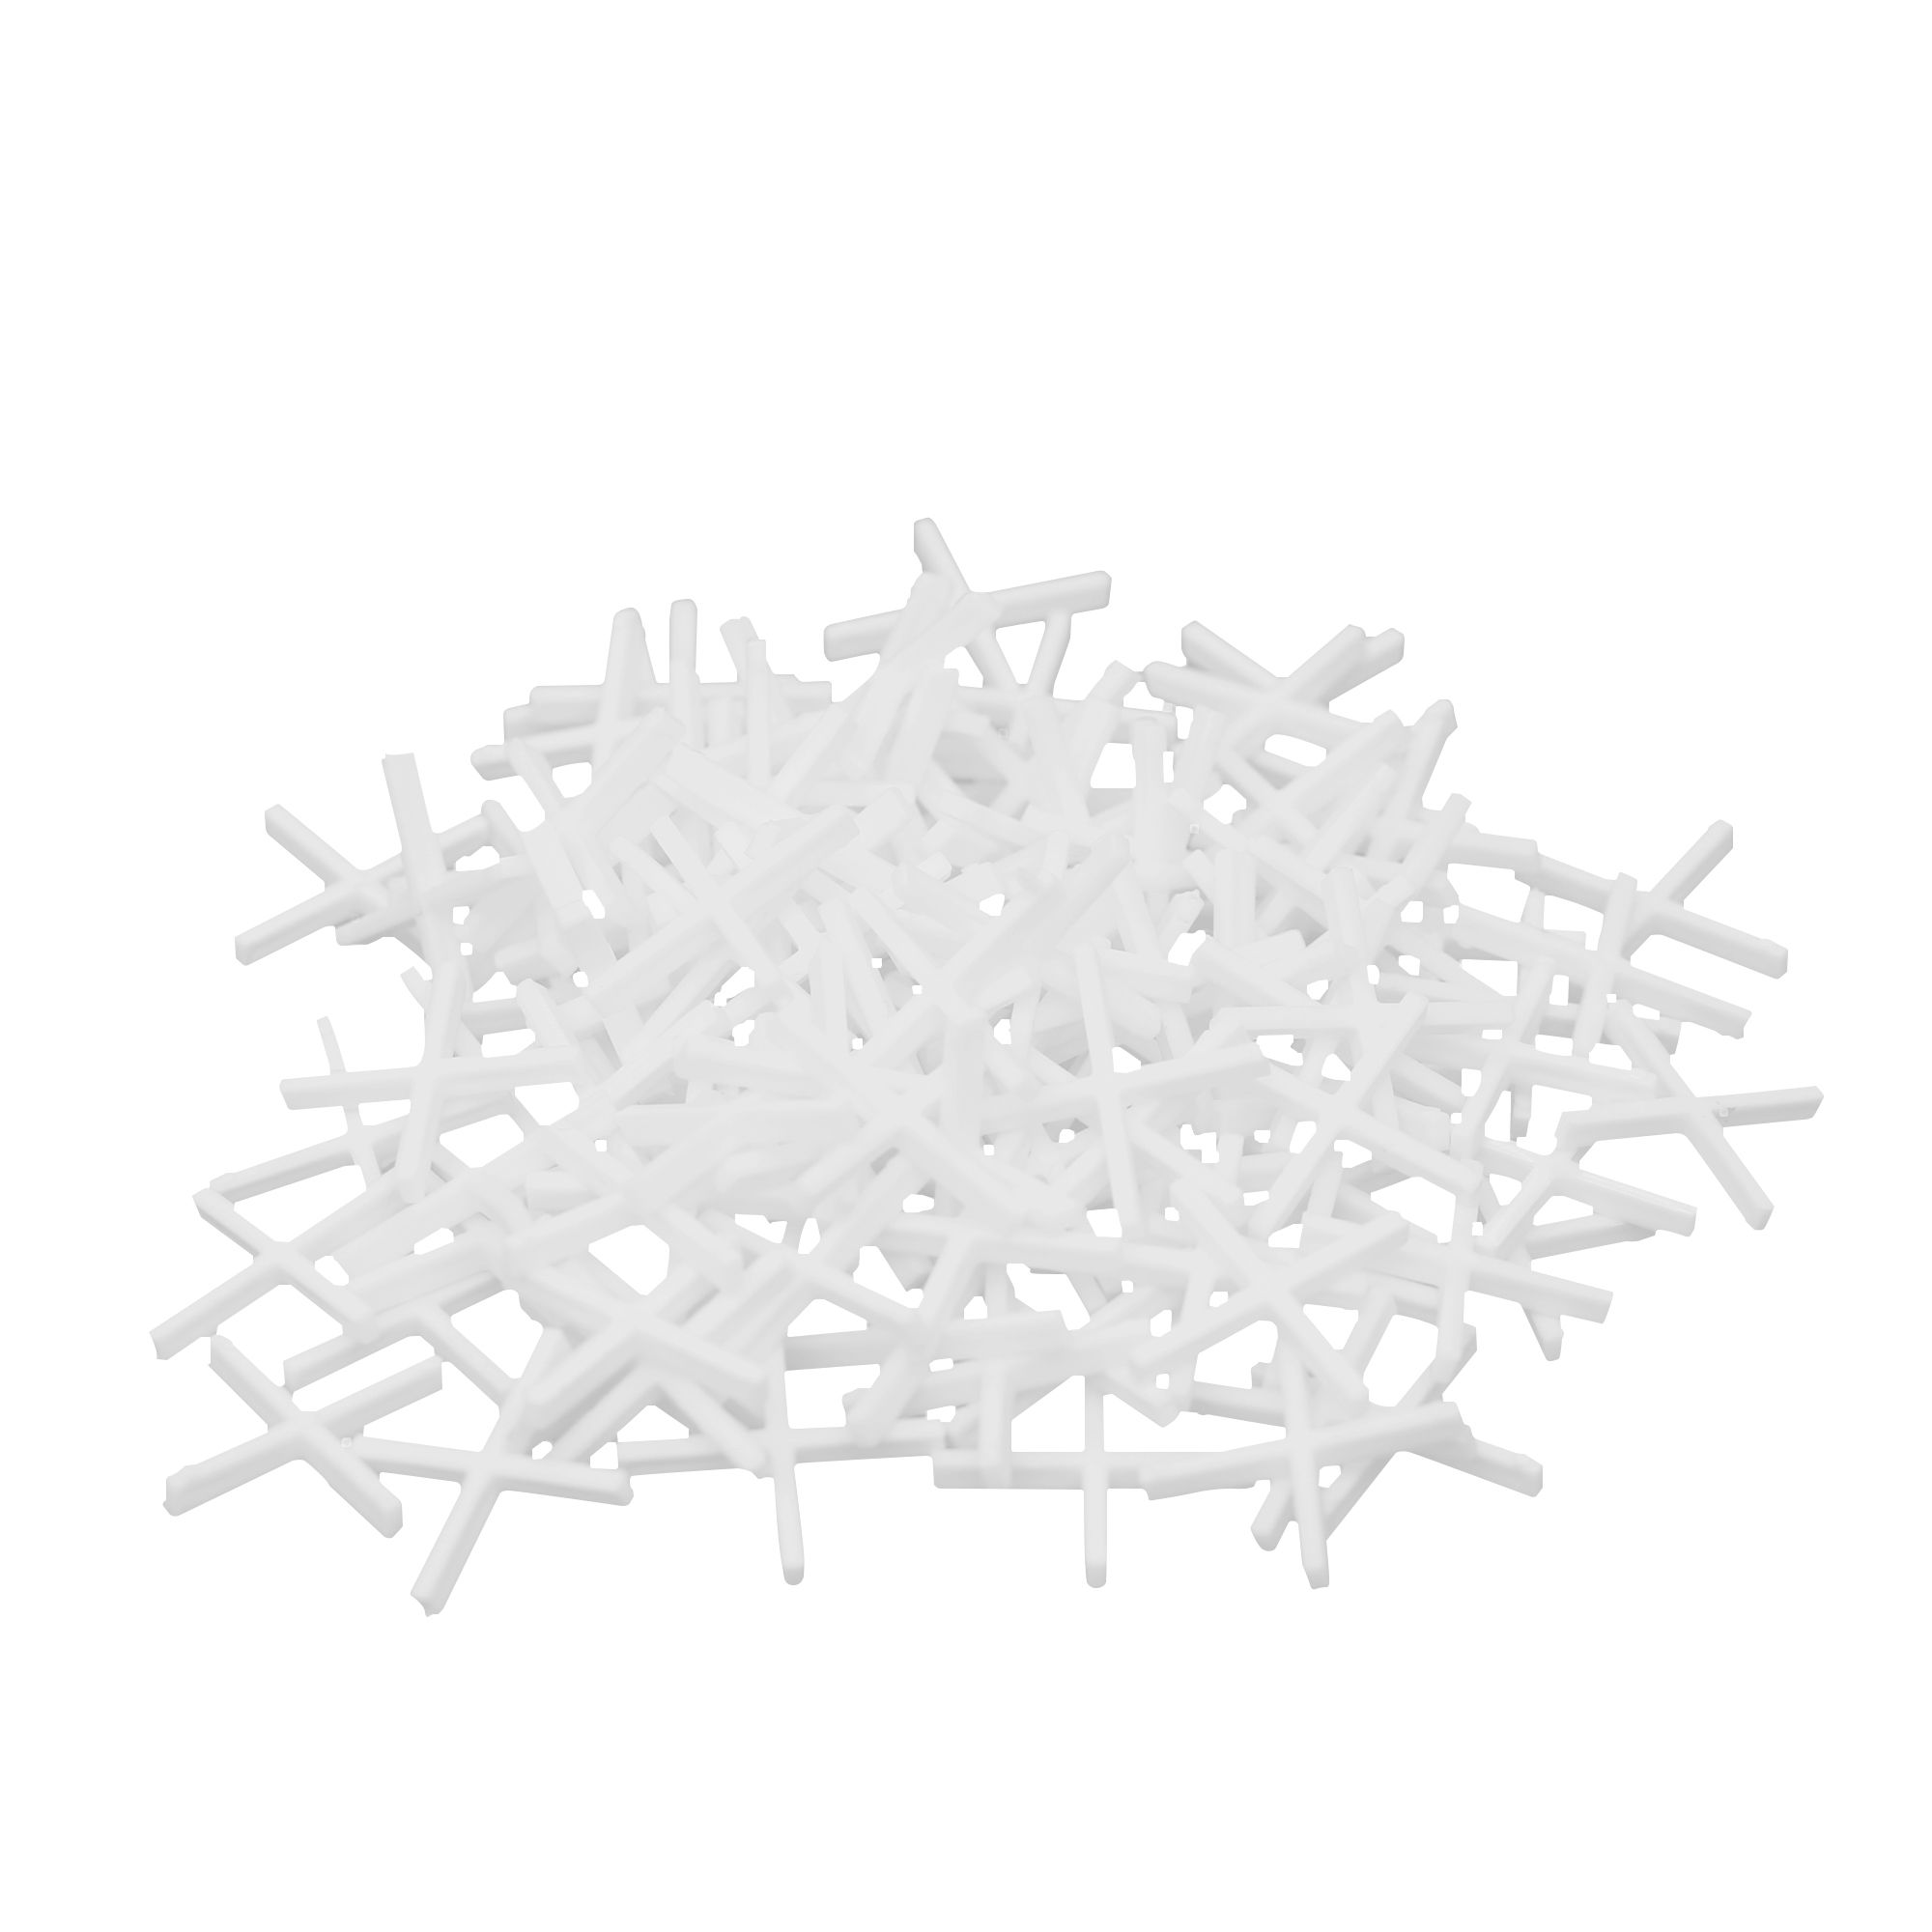 Diall X4-250 Polypropylene 4mm Tile spacer, Pack of 250